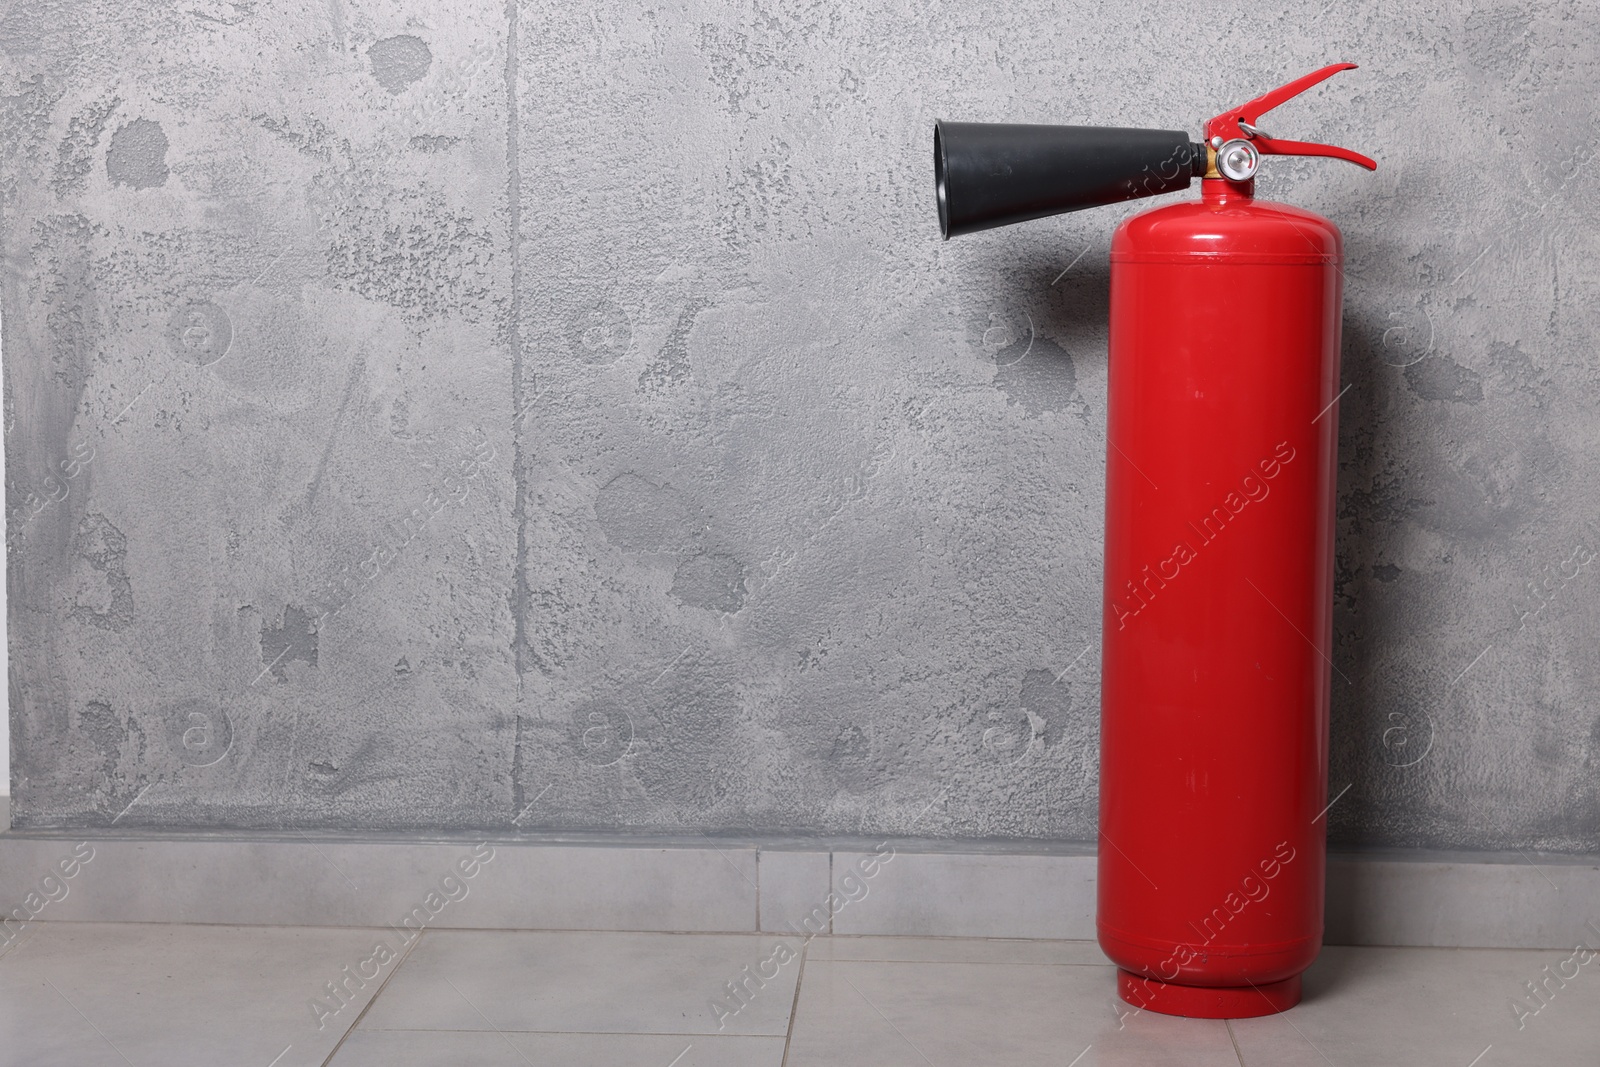 Photo of Red fire extinguisher near grey wall, space for text